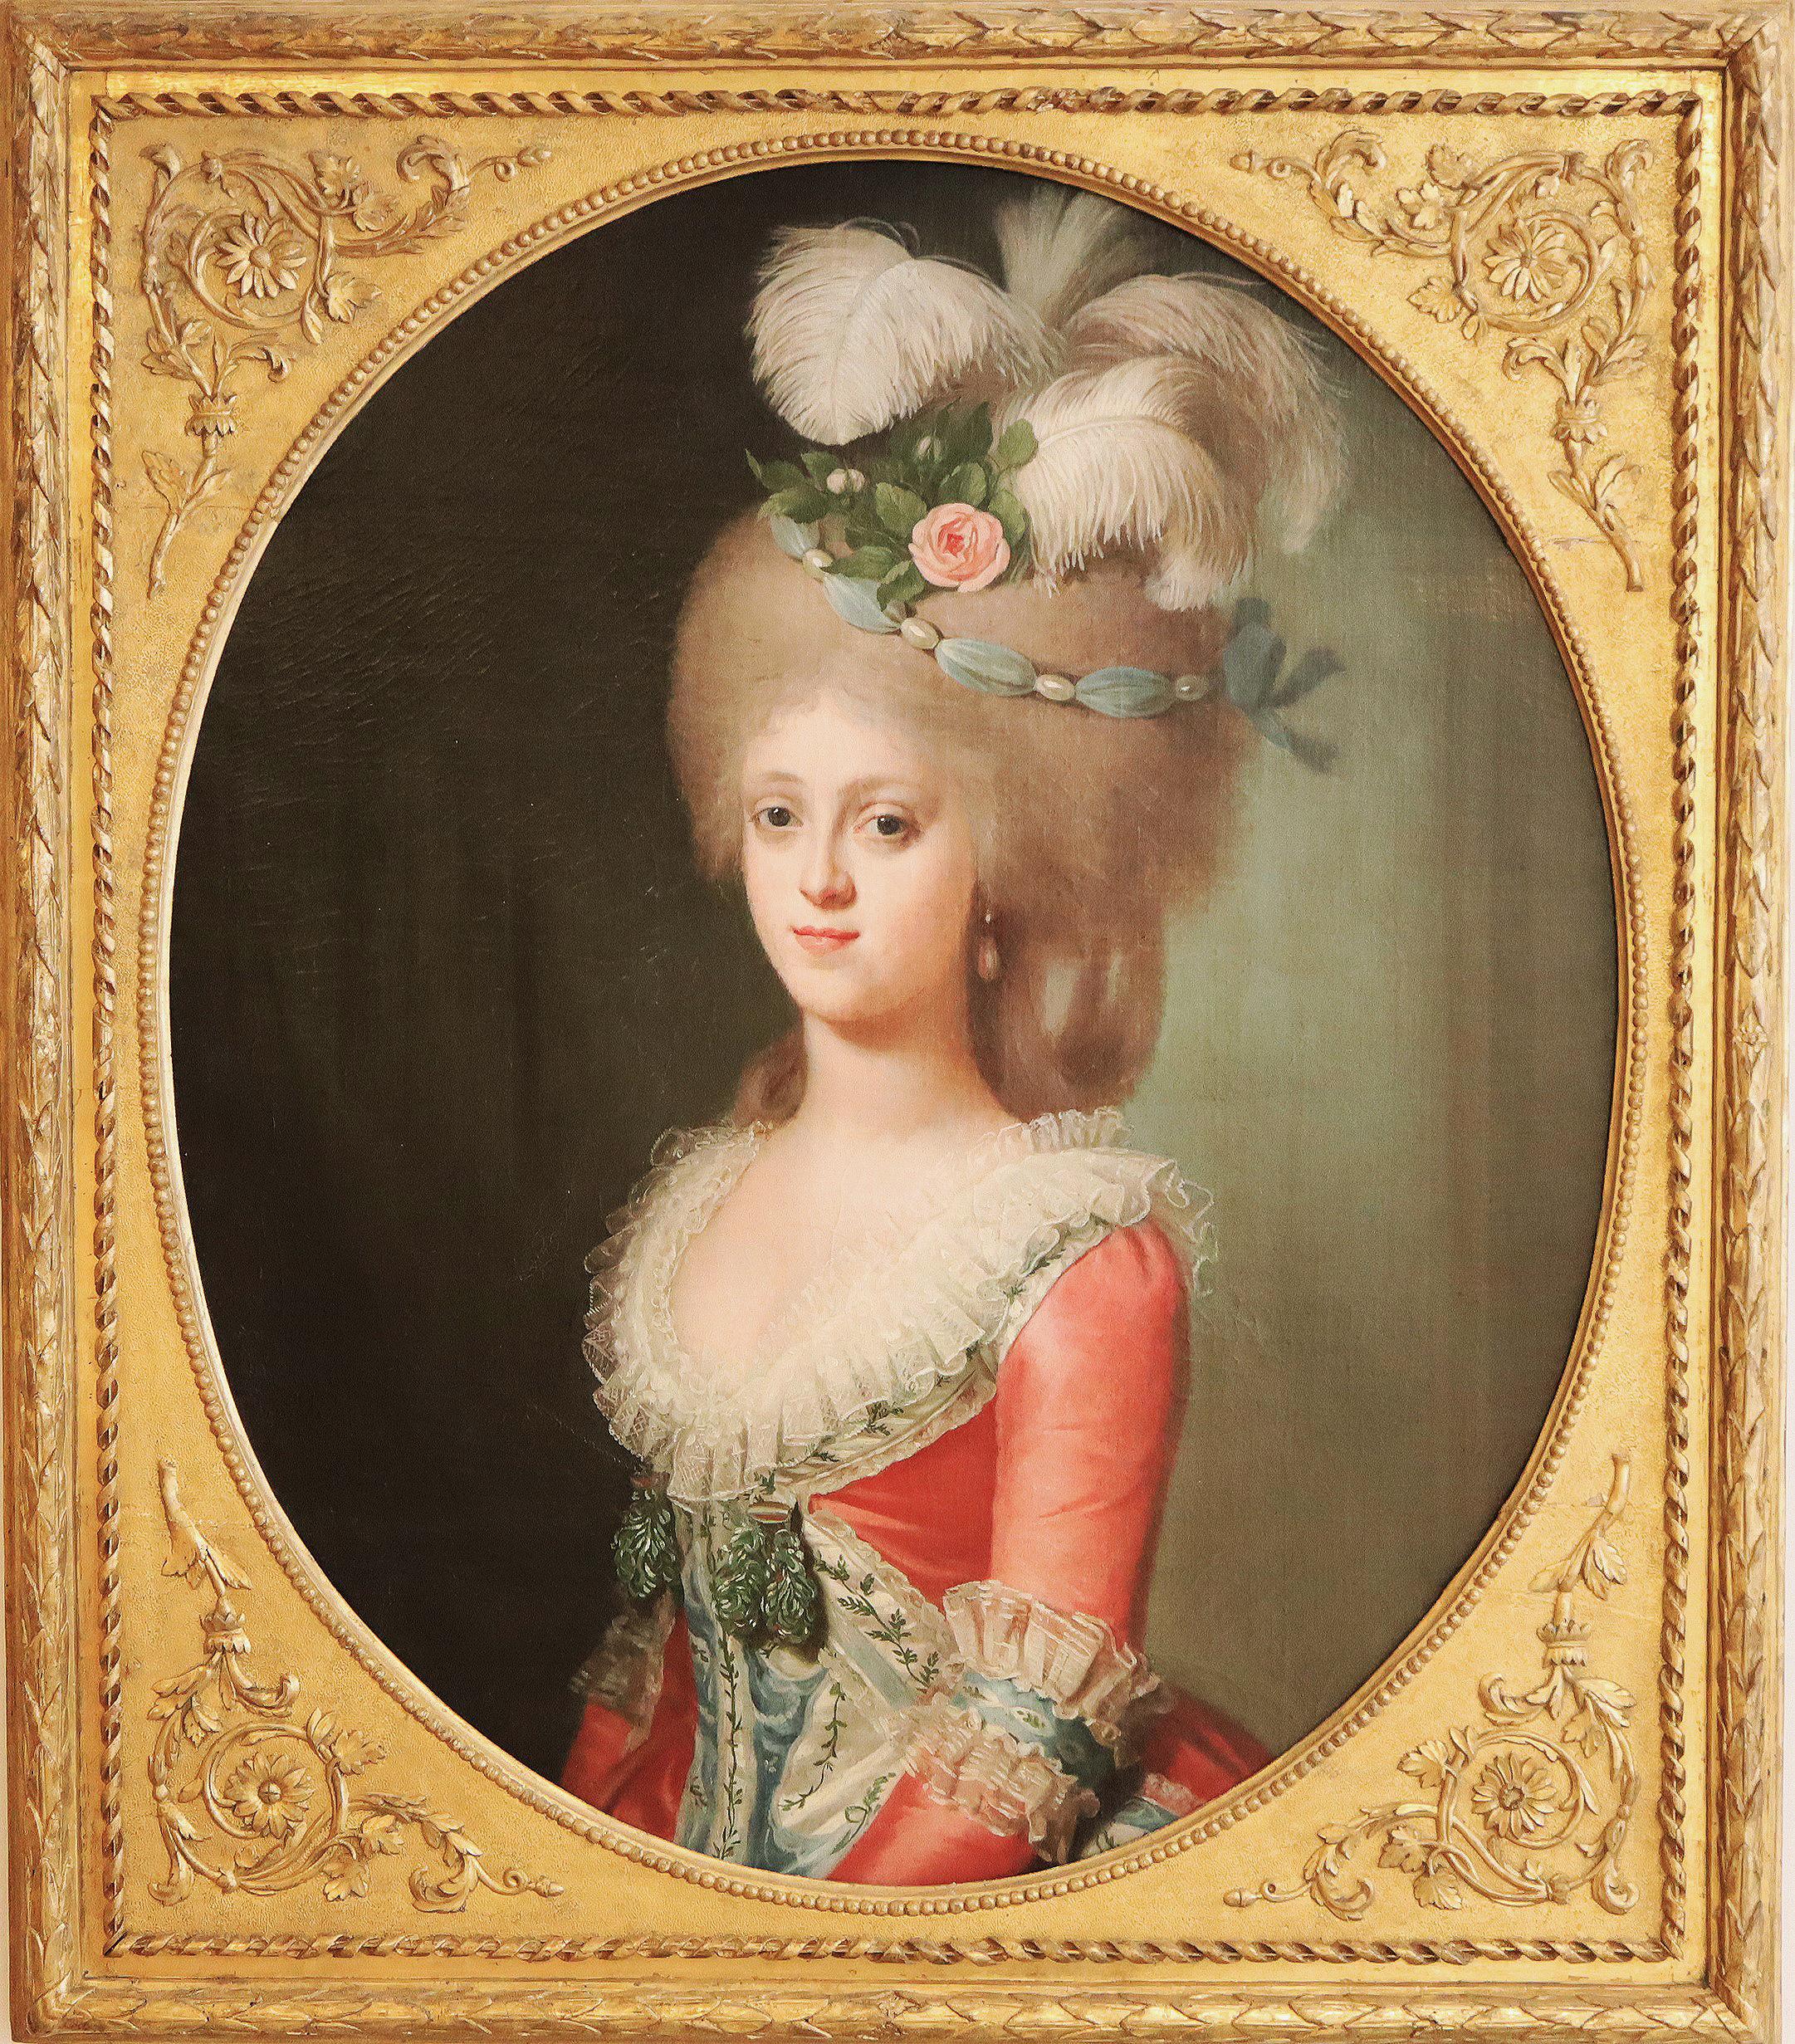 The lady in the portrait is possibly Marie-Antoinette, queen of Louis XVI, and former Austrian princess in her youth. Her extravagant hairstyle demonstrates one of the most striking borrowings of English fashion of the 18th century. The colours used